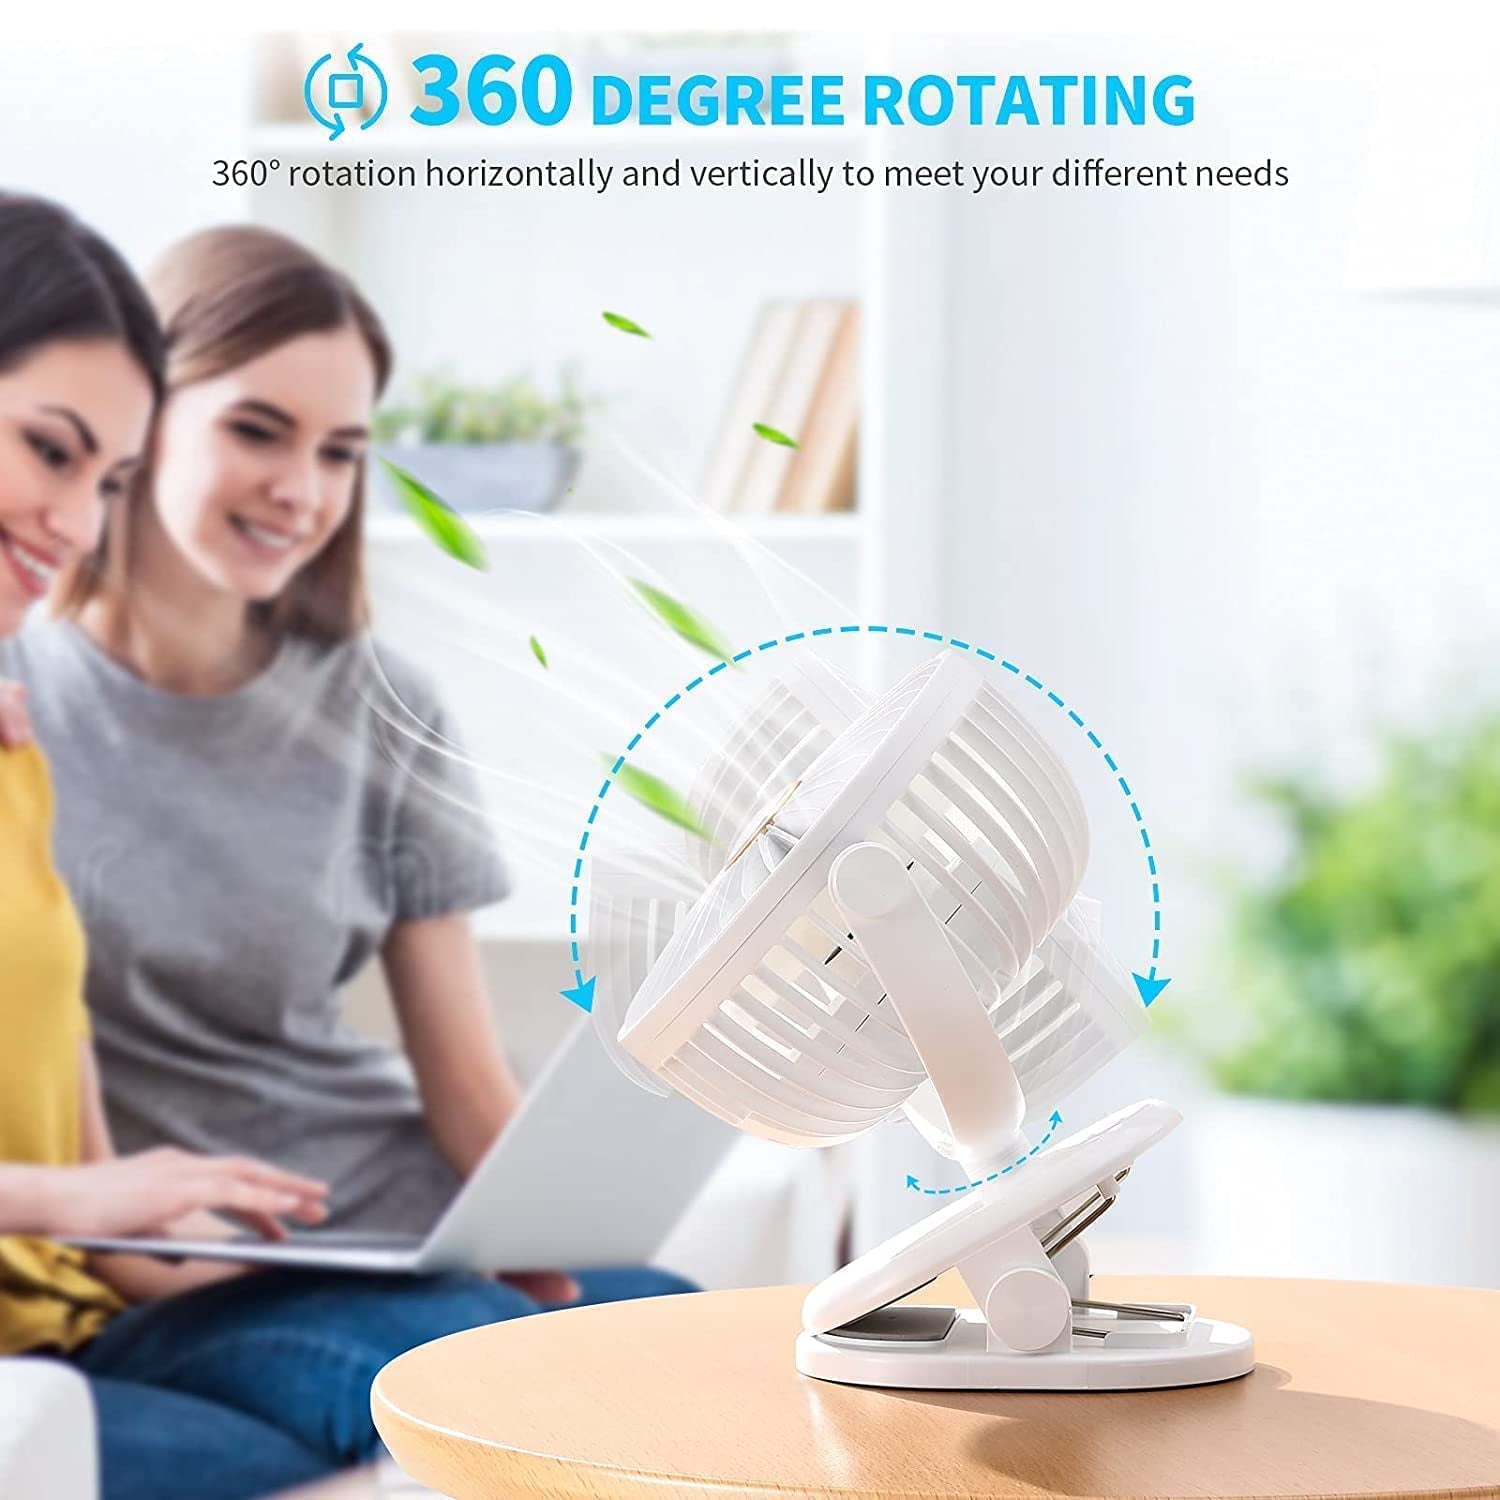 17930 Portable Clip-on Fan, Battery Operated, With Light & Spray, Small Yet Powerful USB Table Fan, 3-Speed Quiet Rechargeable Mini Desk Fan, 360° Rotation, Personal Cooling Fan for Home, Office, Camping